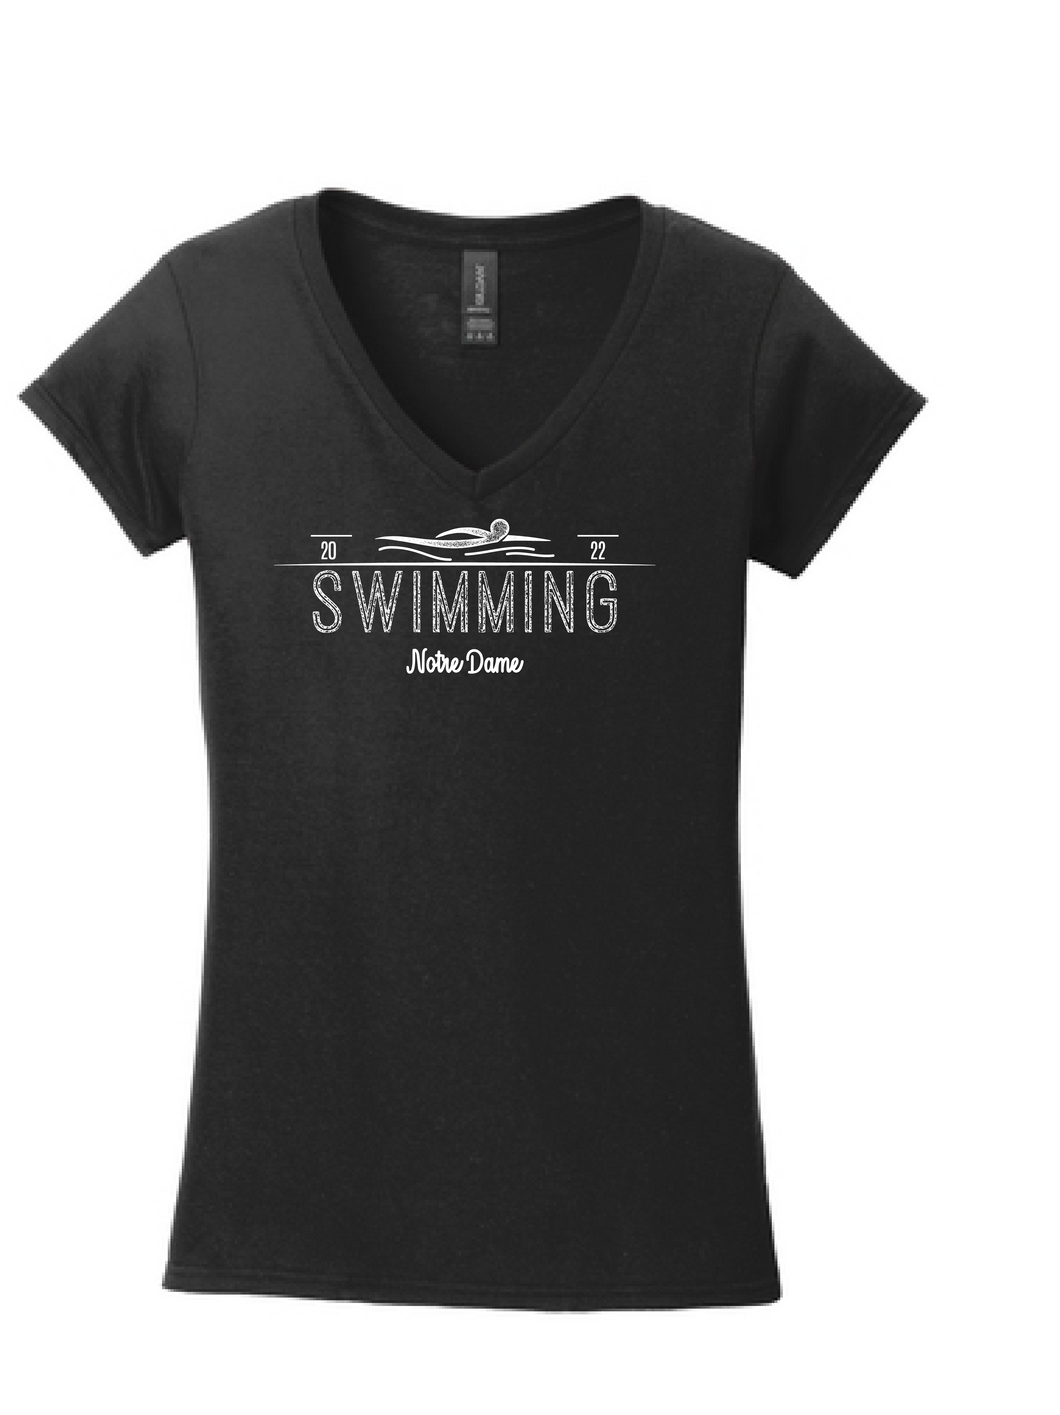 2022 Notre Dame Swimming T-Shirt